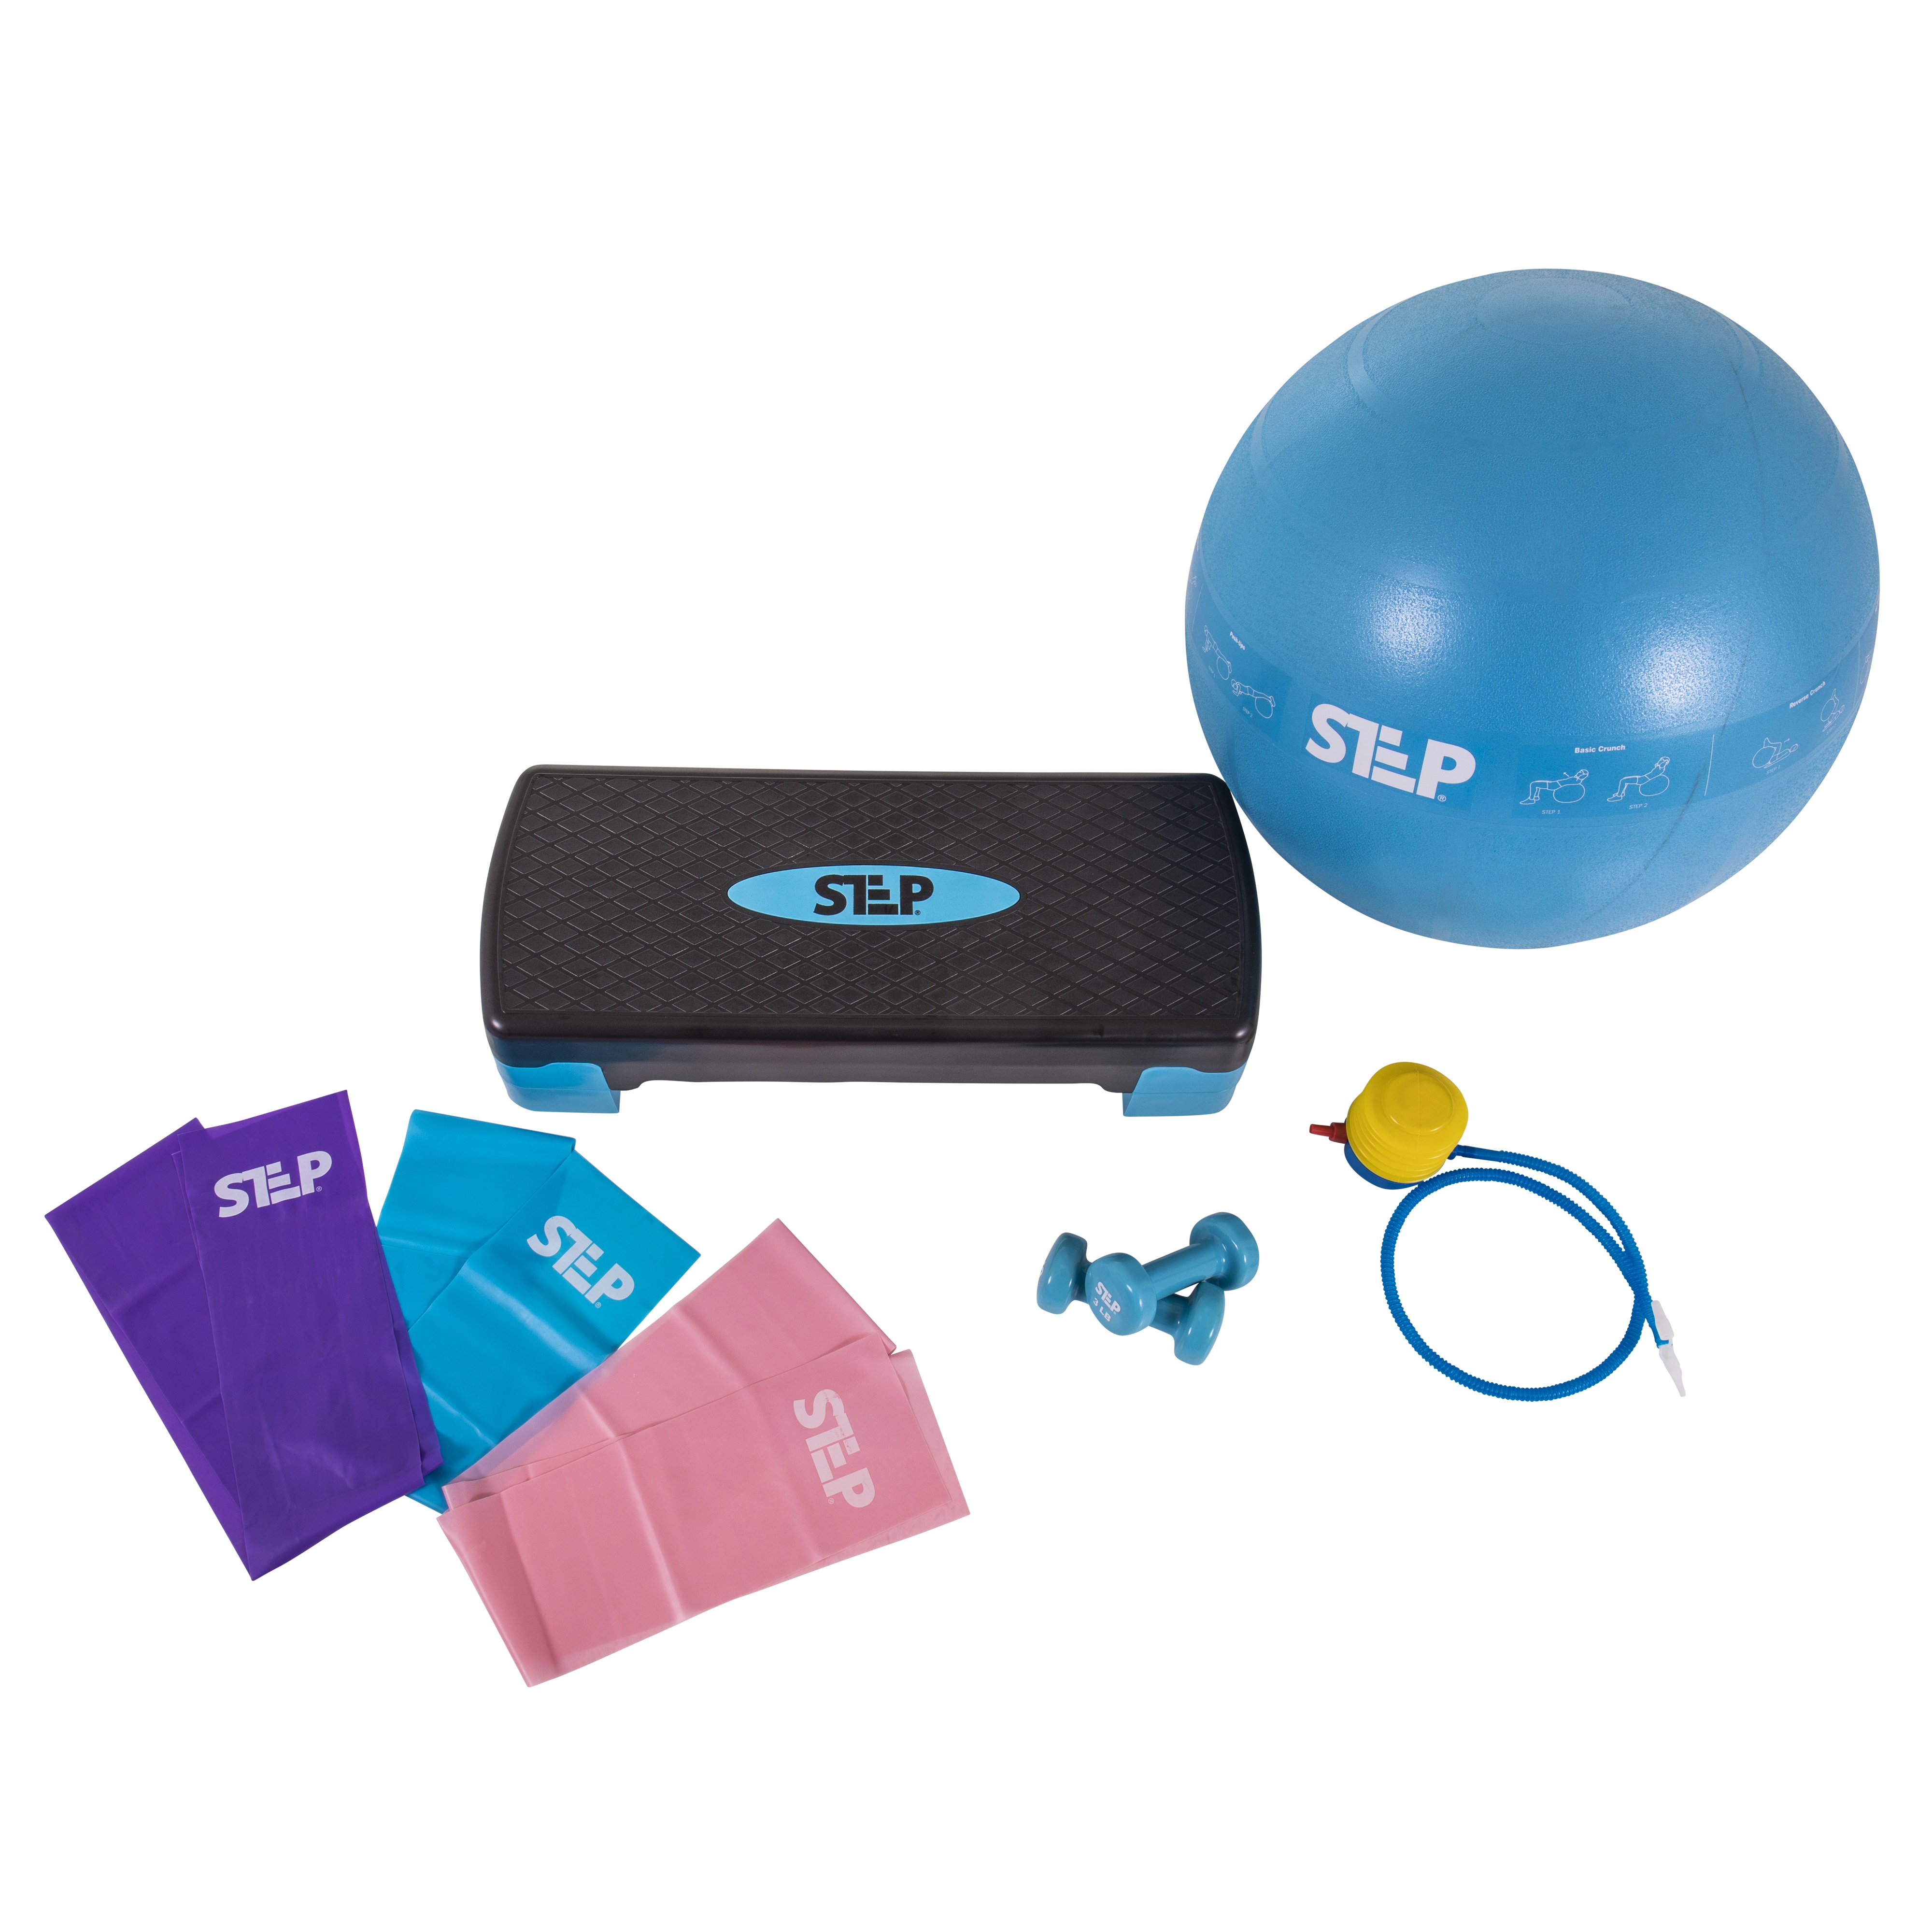 The Step Bundle (The Step, Flat Resistance Bands, Dumbbells, and Resistance Ball) - image 1 of 6